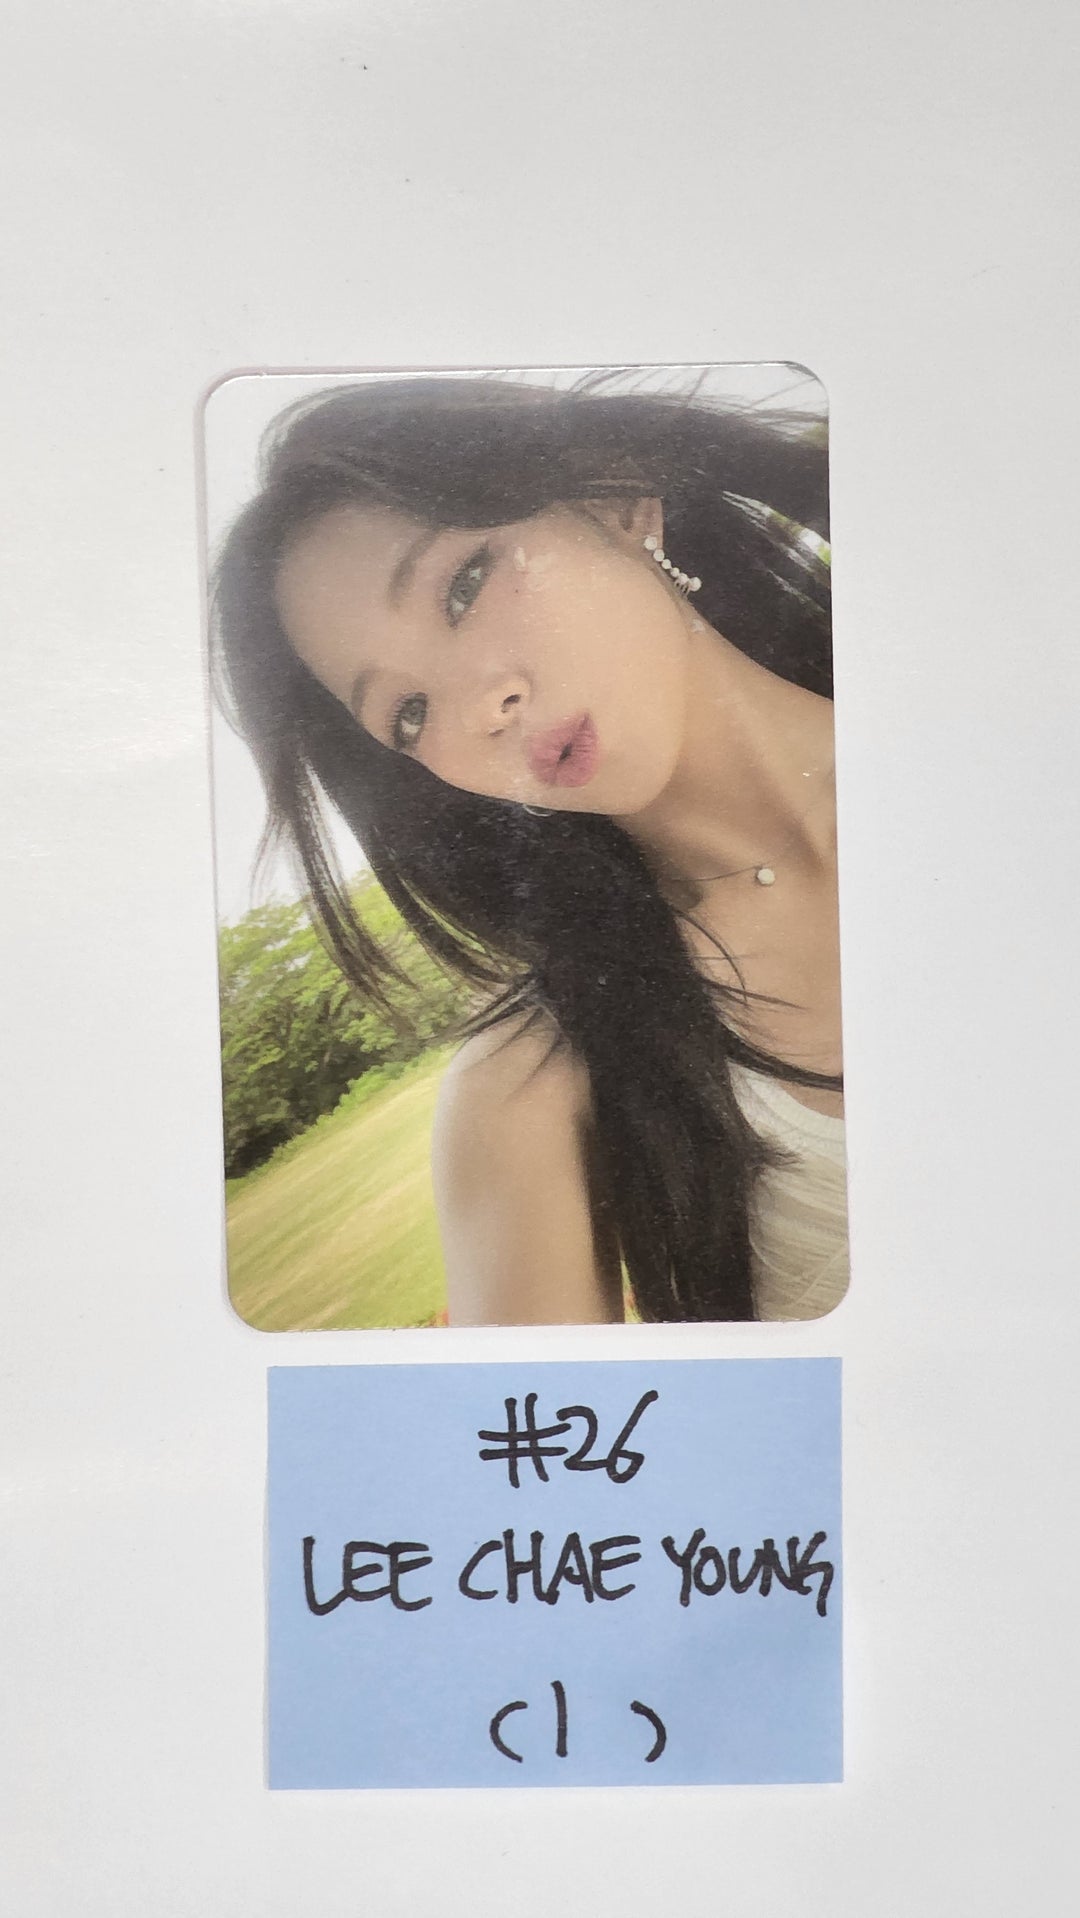 Fromis_9 "from our Memento Box" - Official Photocard (2)